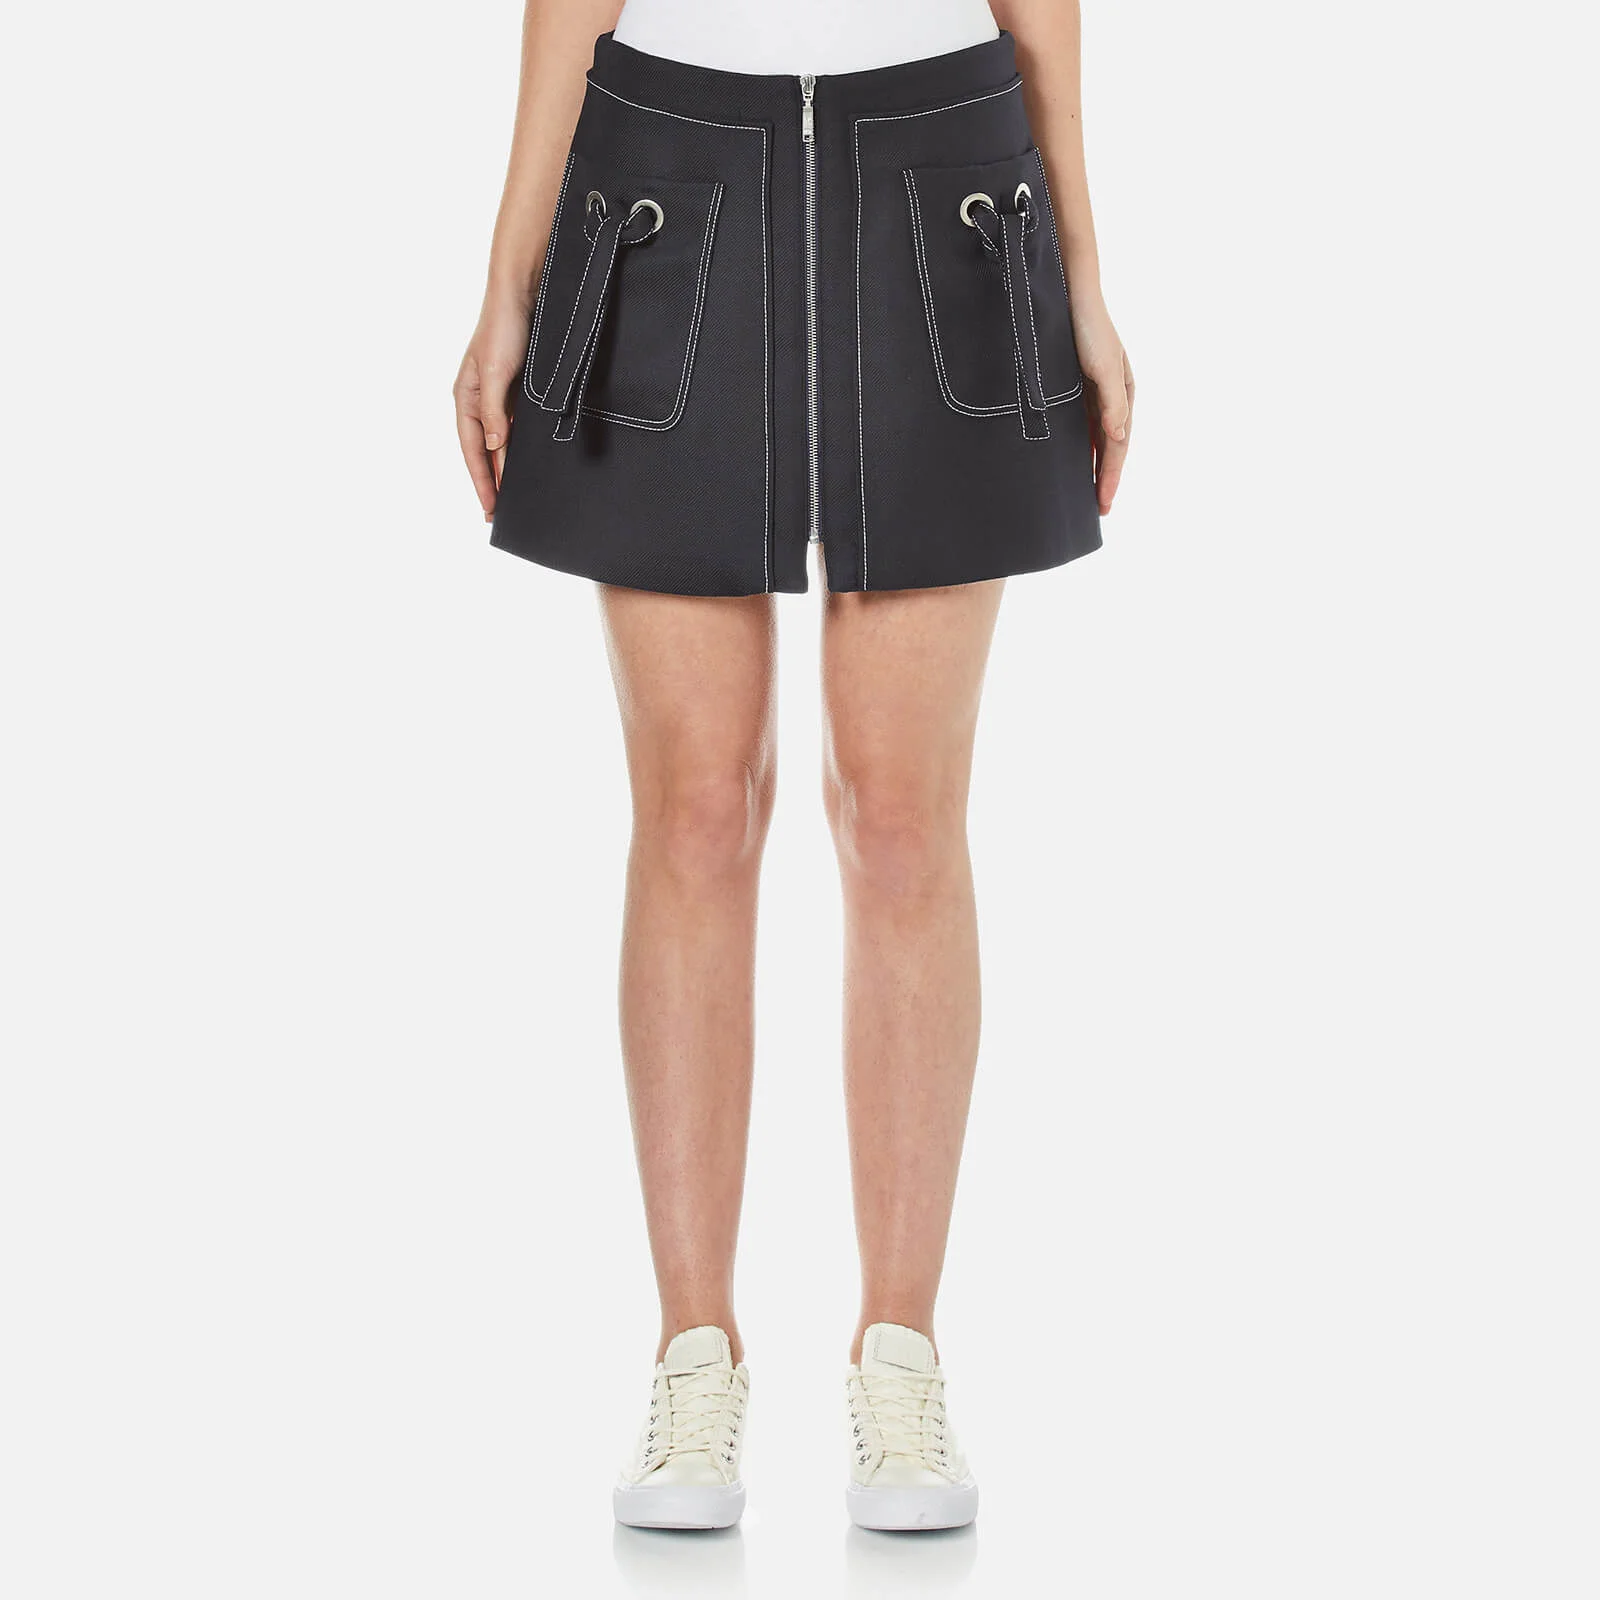 KENZO Women's Cotton Wool Blend Skirt with Pockets - Midnight Blue Image 1